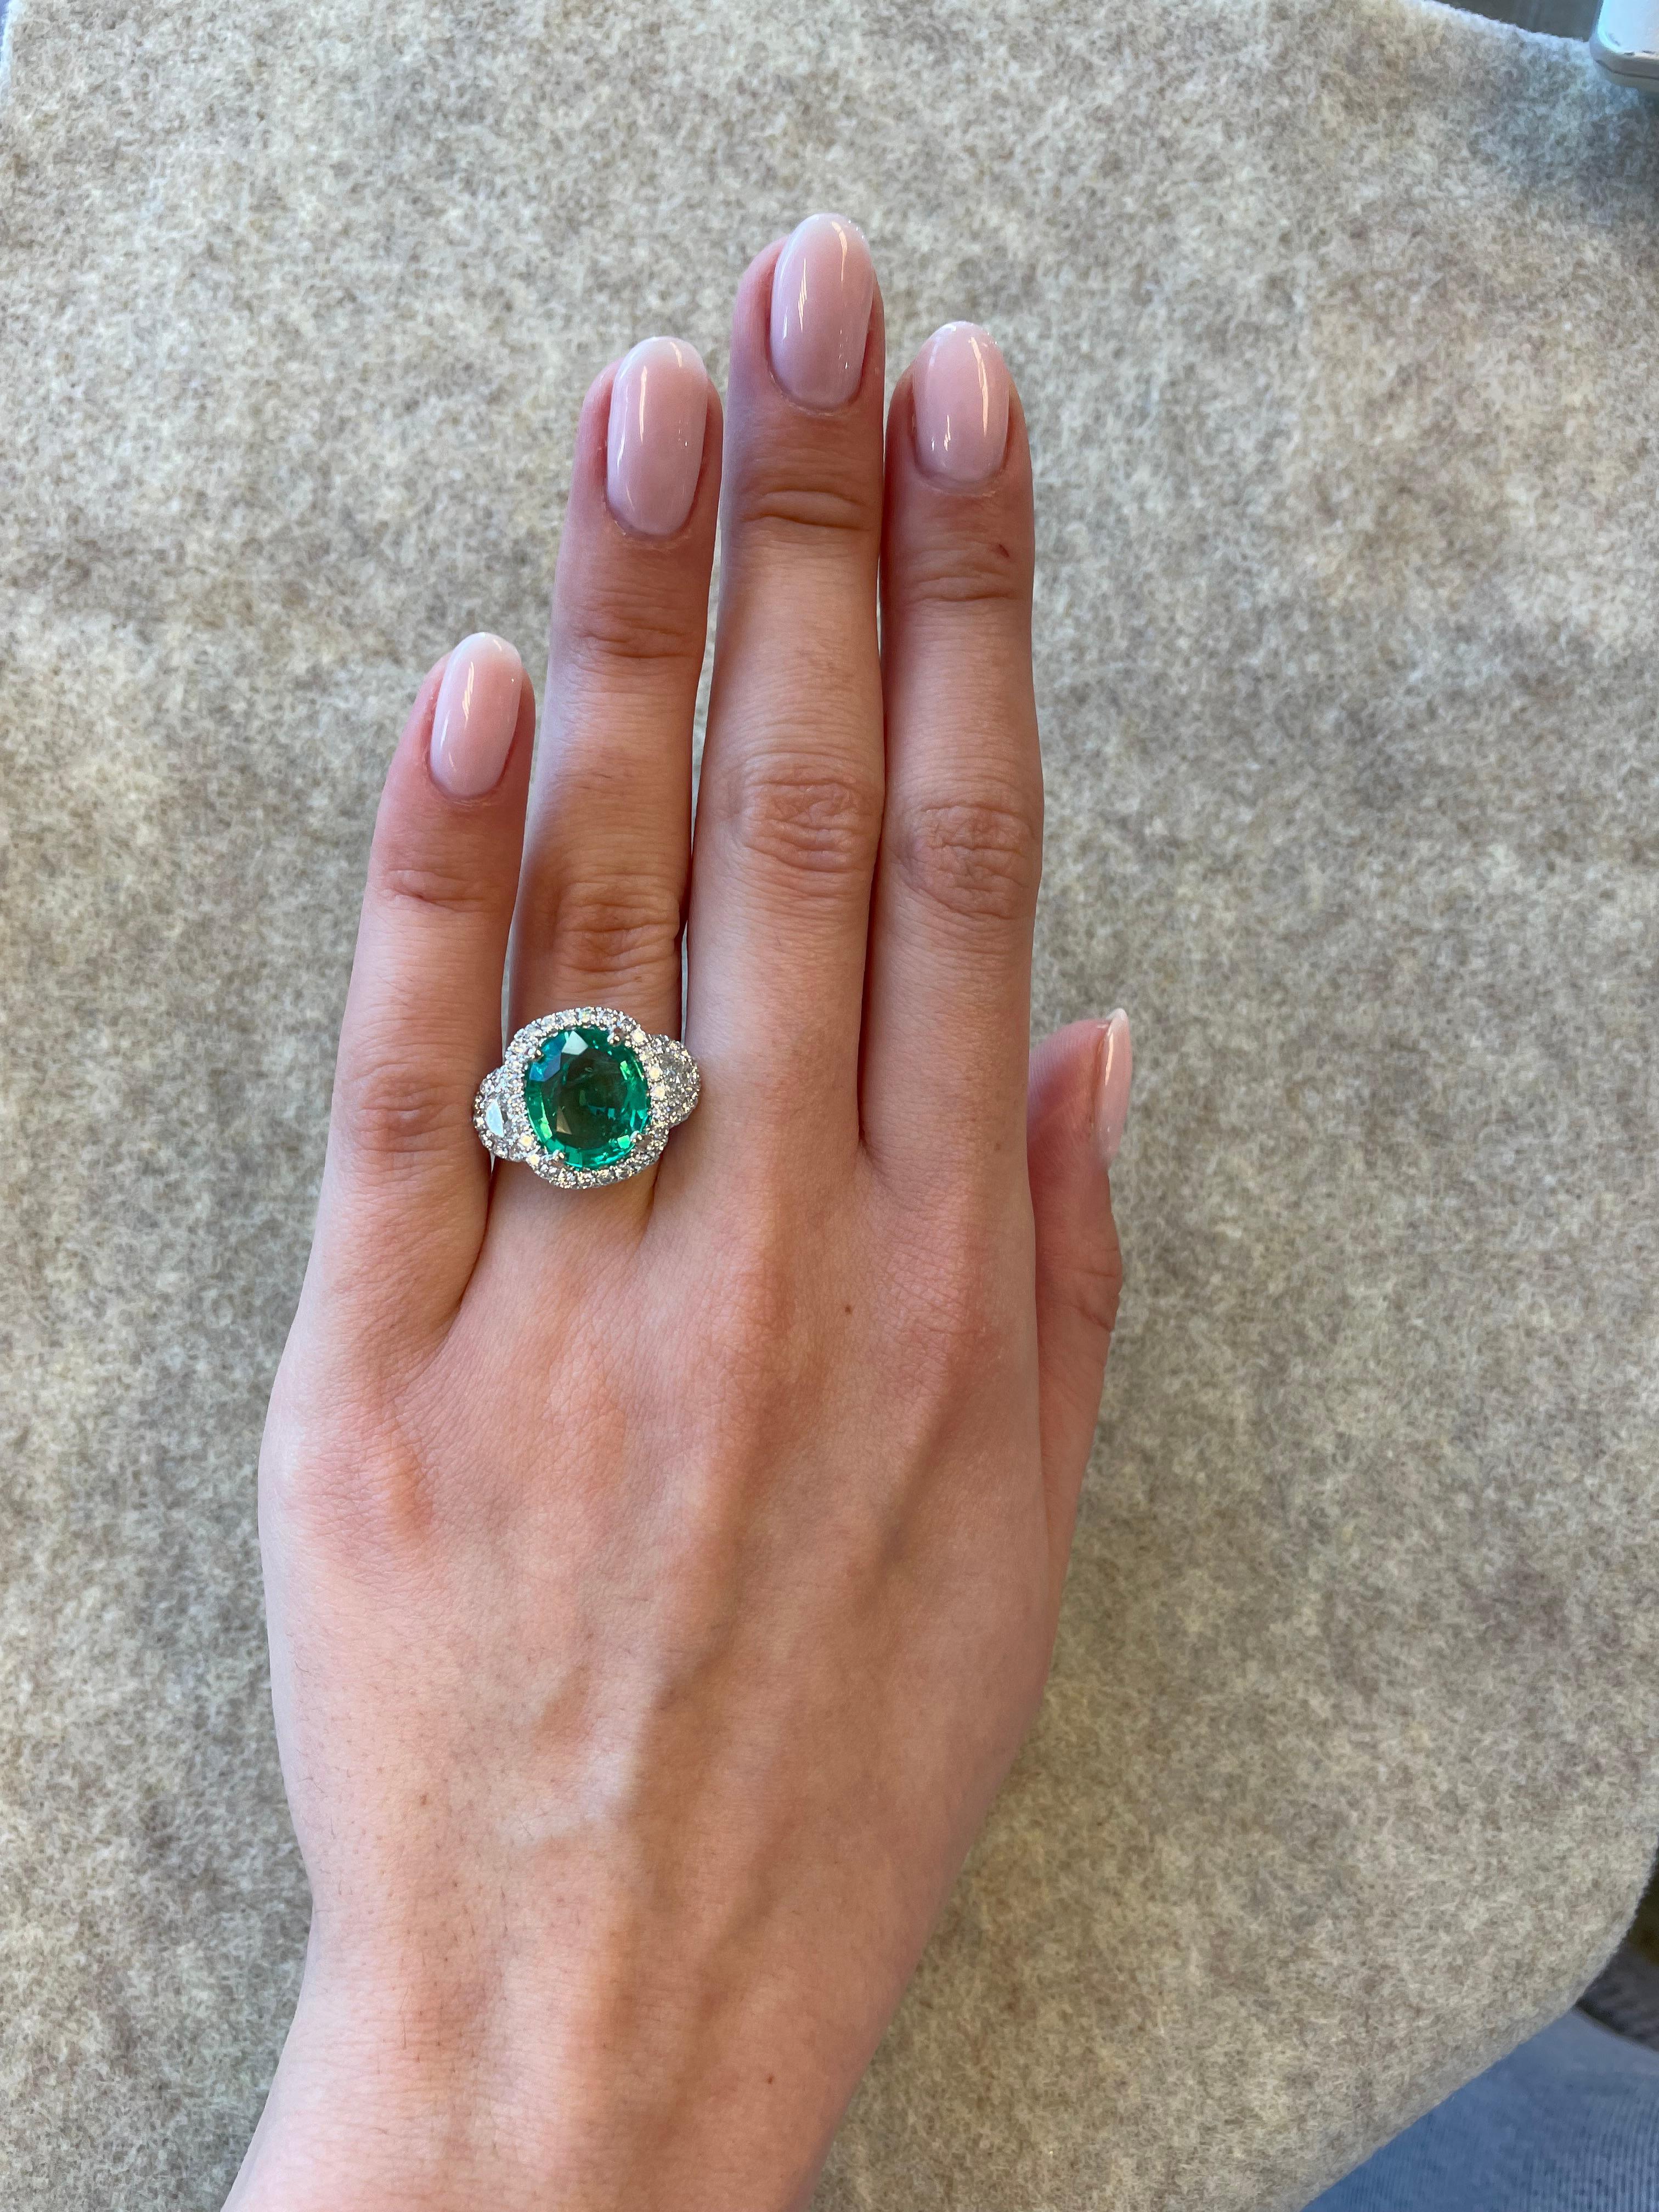 Pretty emerald and diamond three stone ring with halo. 
4.94 carats total gemstone weight.
3.80 carat oval emerald. 2 half moons with 48 round brilliant diamonds. Approximately G/H color and VS-SI clarity. 18k white gold, current ring size 6.5.